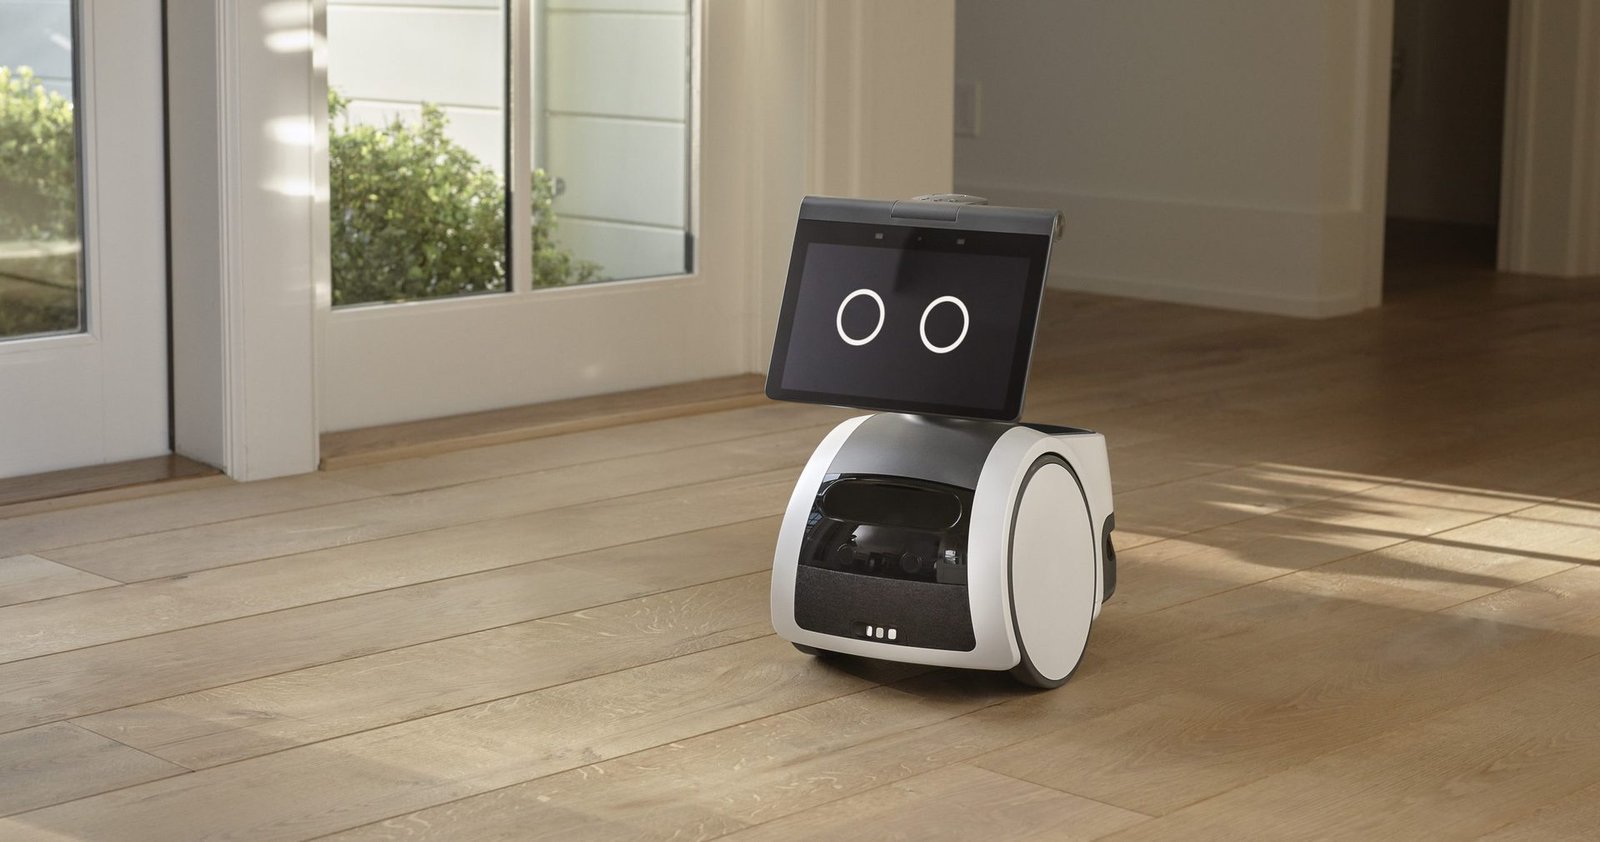 Record $500 discount on Amazon’s mobile security robot